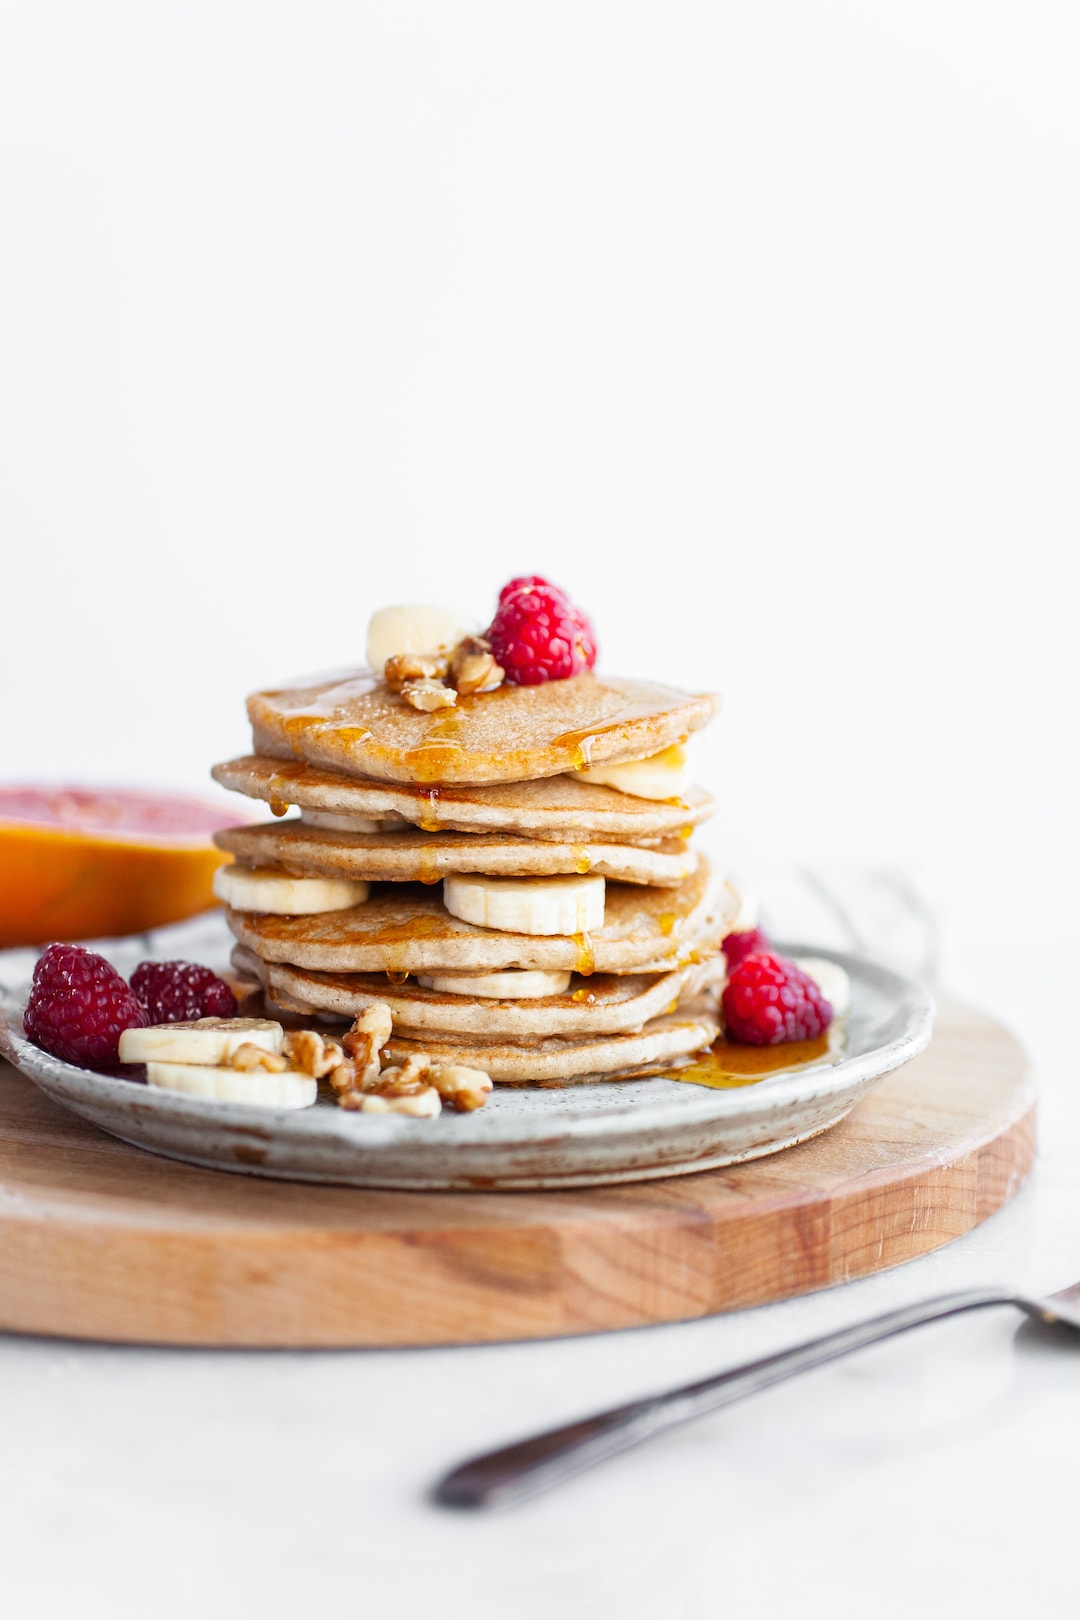 Perfect Vegan Buckwheat Pancakes stacked on a plate with raspberries and sliced banana